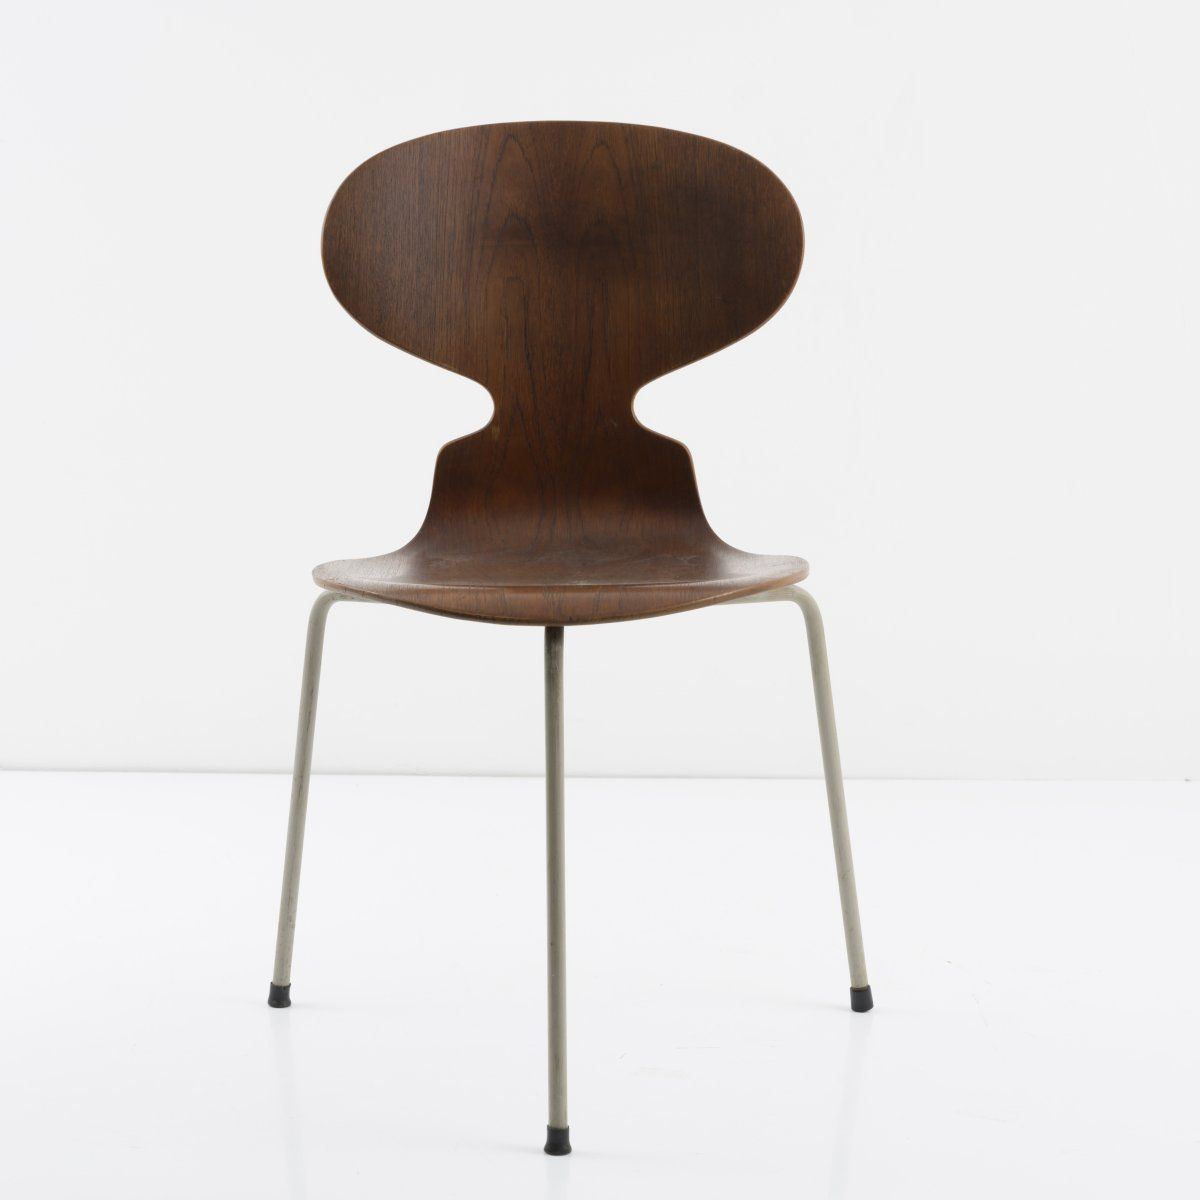 Null Arne Jacobsen, 'Ant' - '3100' chair, 1952, H. 77,5 x 53 x 50 cm. Made by Fr&hellip;